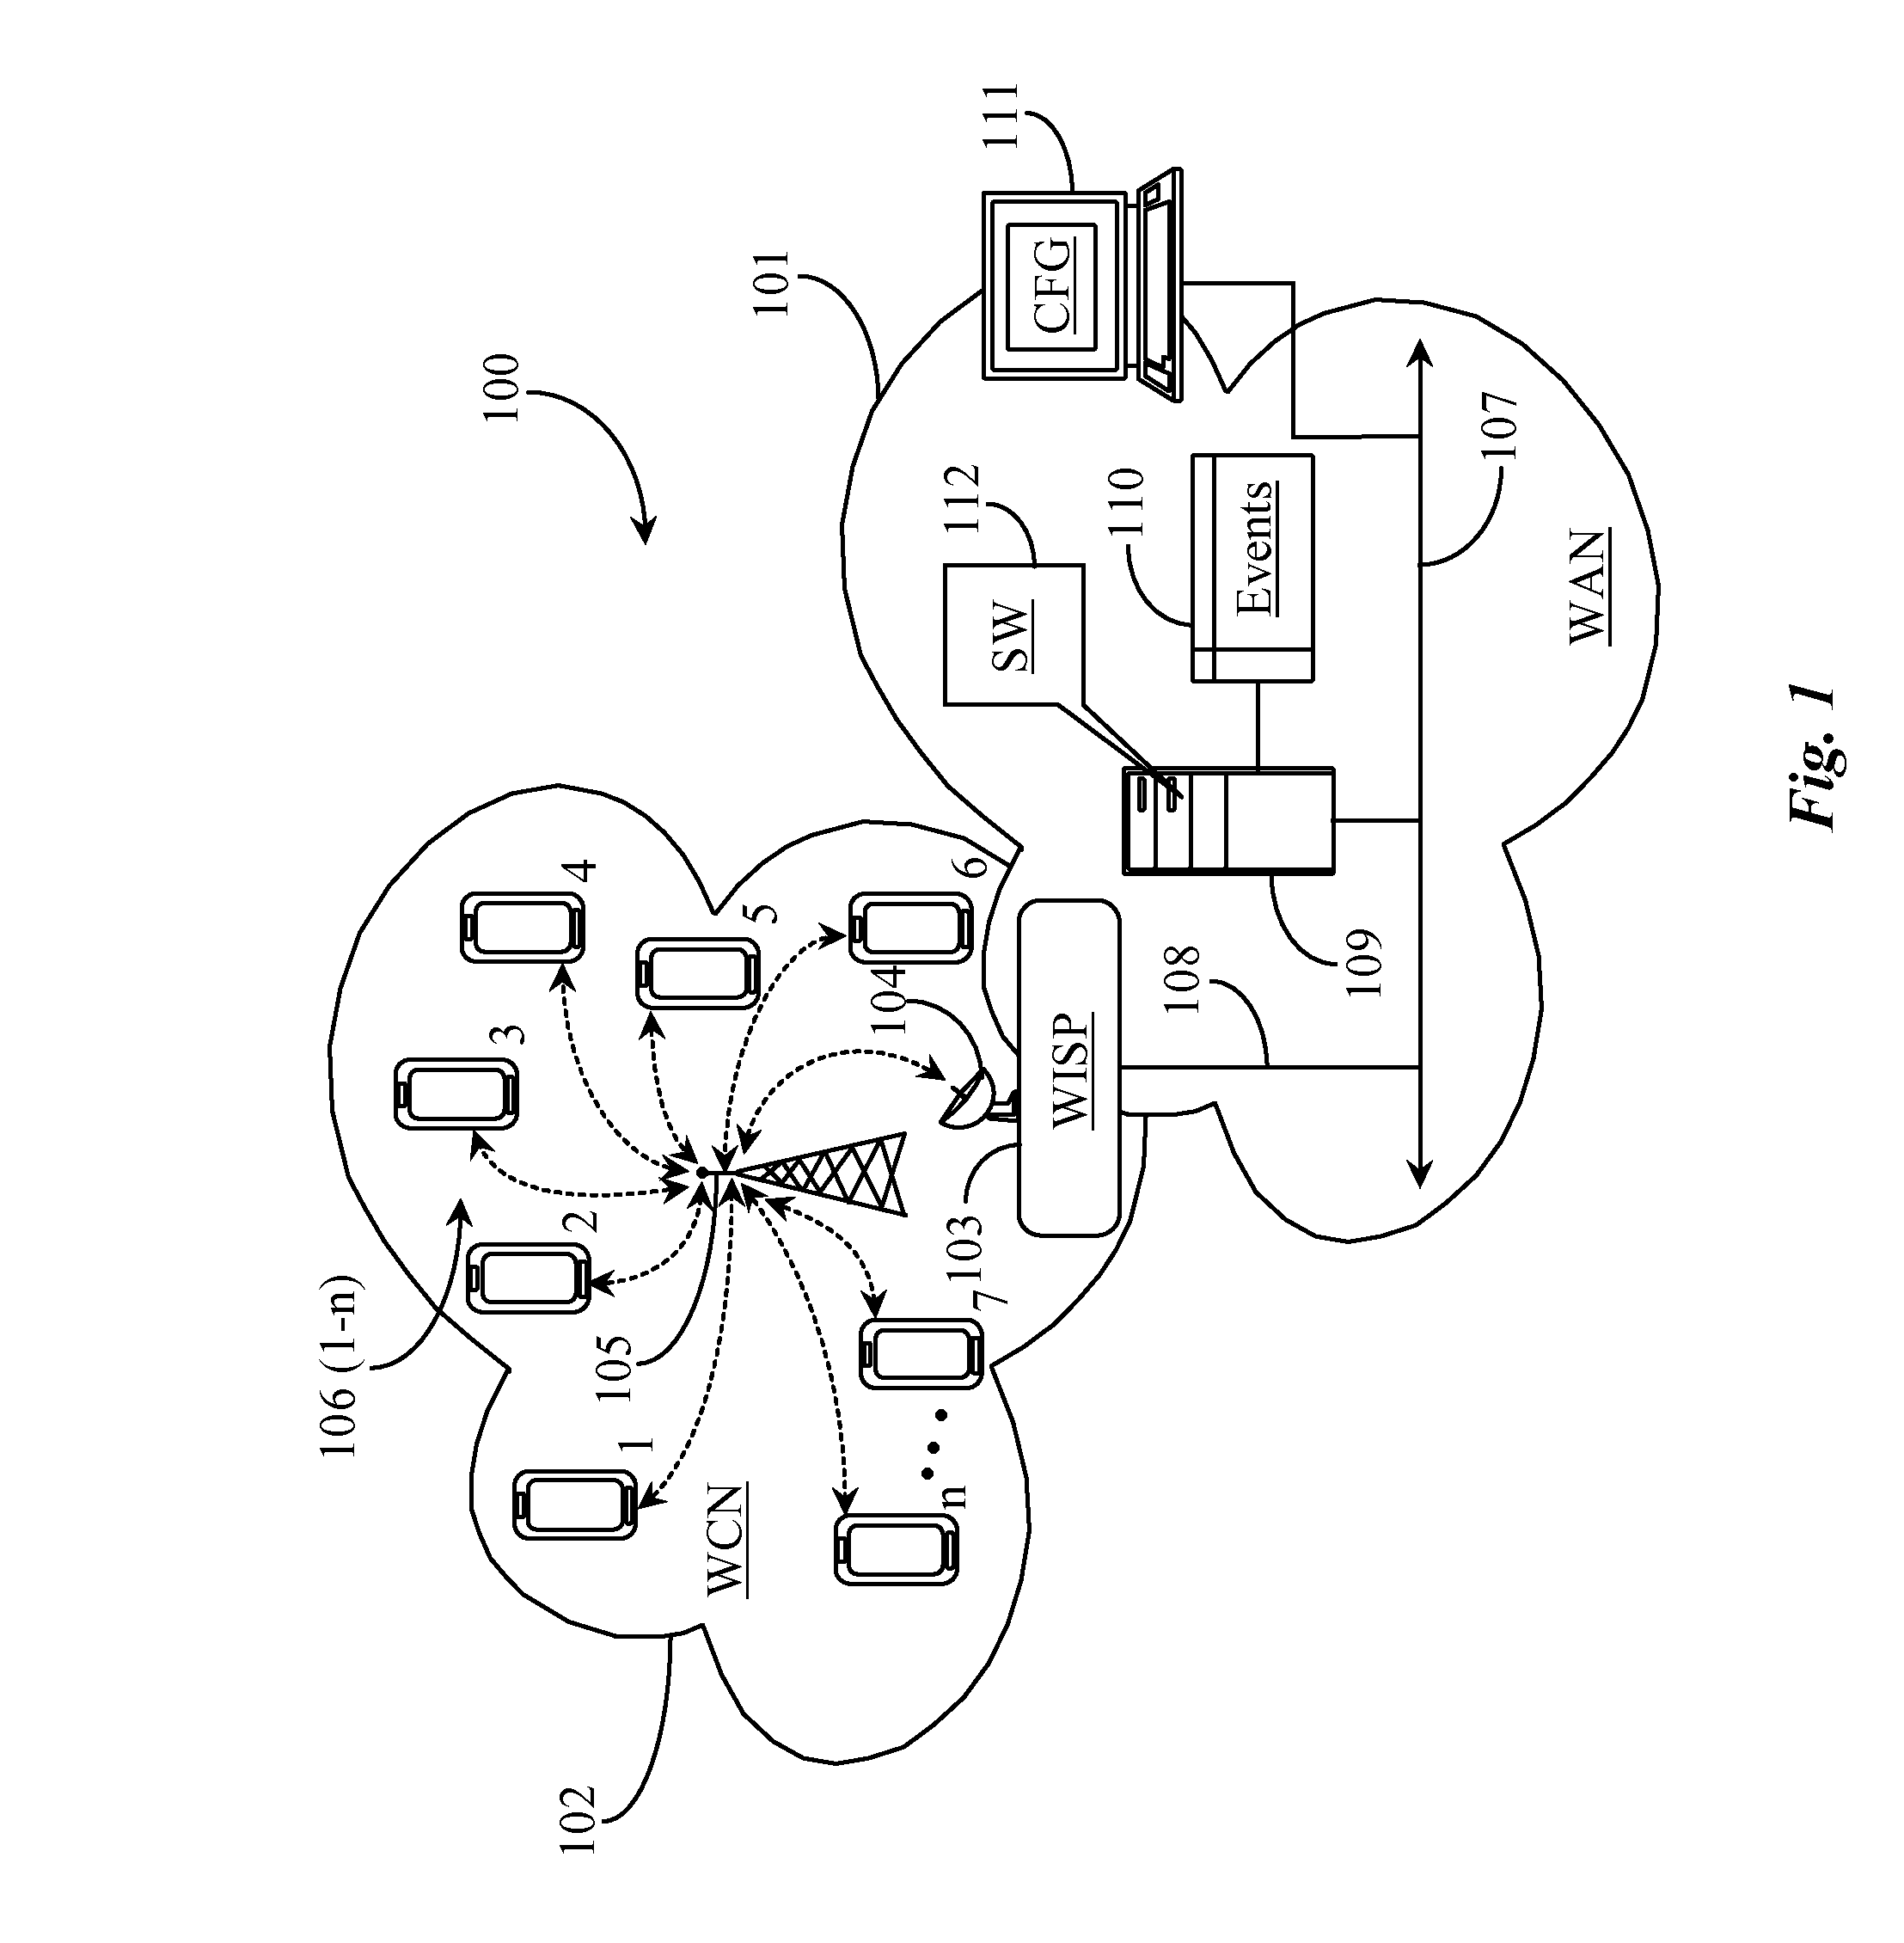 System for Determining Presence of and Authorizing a Quorum to Transact Business over a Network